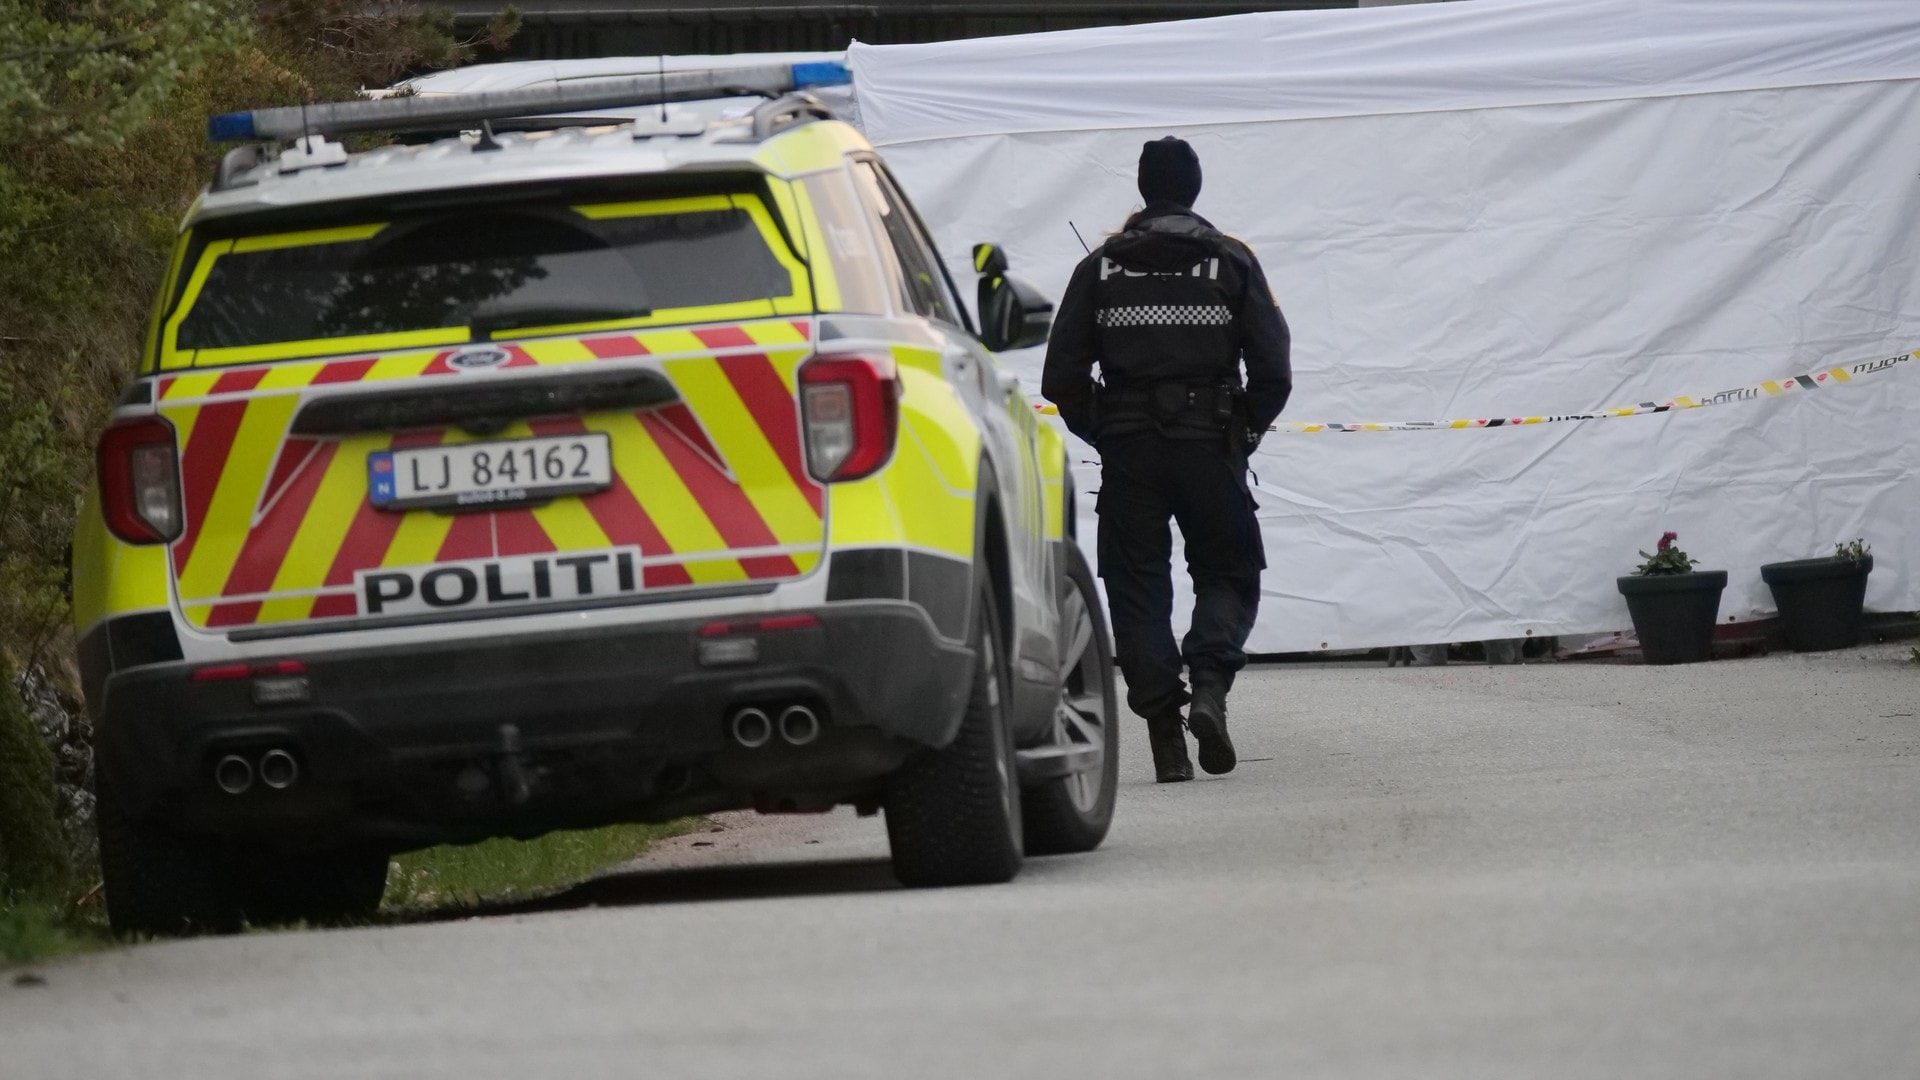 Kristiansund – NRK Møre og Romsdal – Armed police have responded to a serious incident on local news, TV and radio.